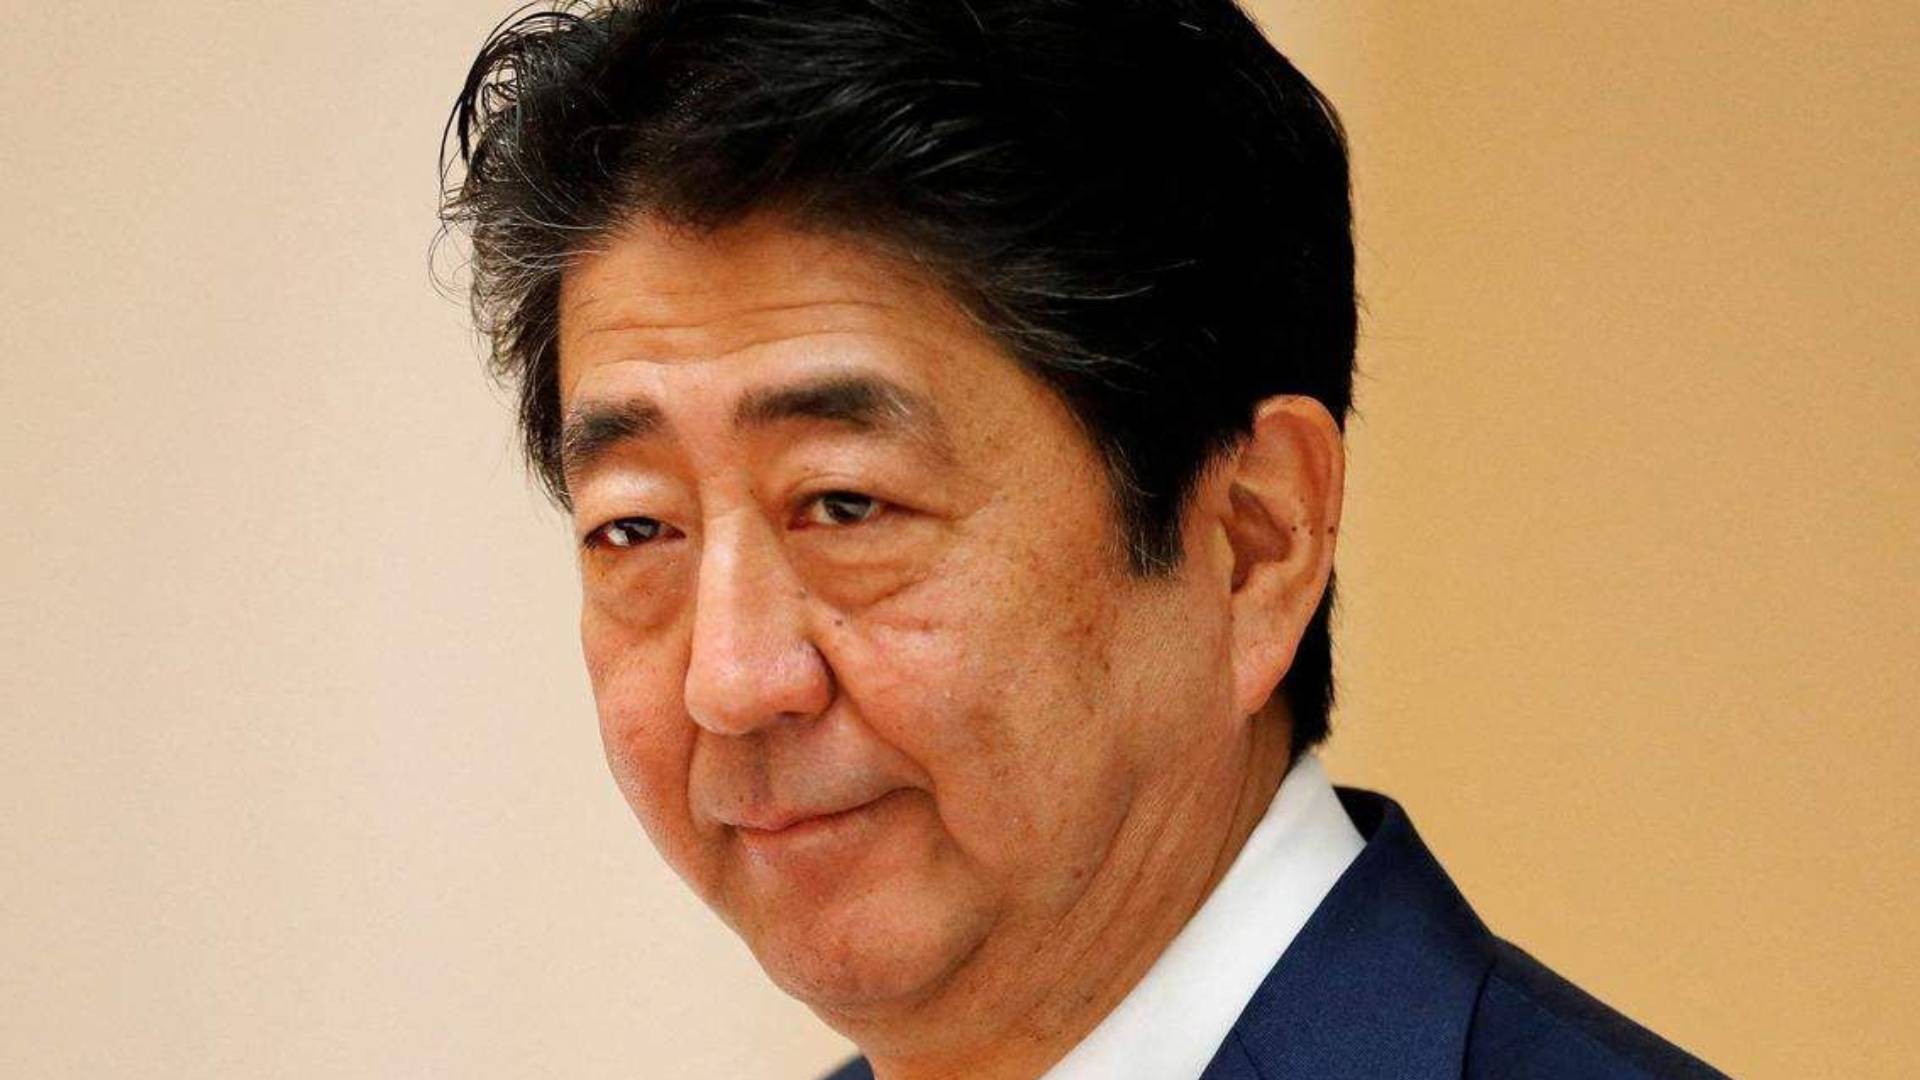  apanese former Prime Minister Shinzo Abe has died, public broadcaster NHK said on Friday. - Photo Credit: Reuters